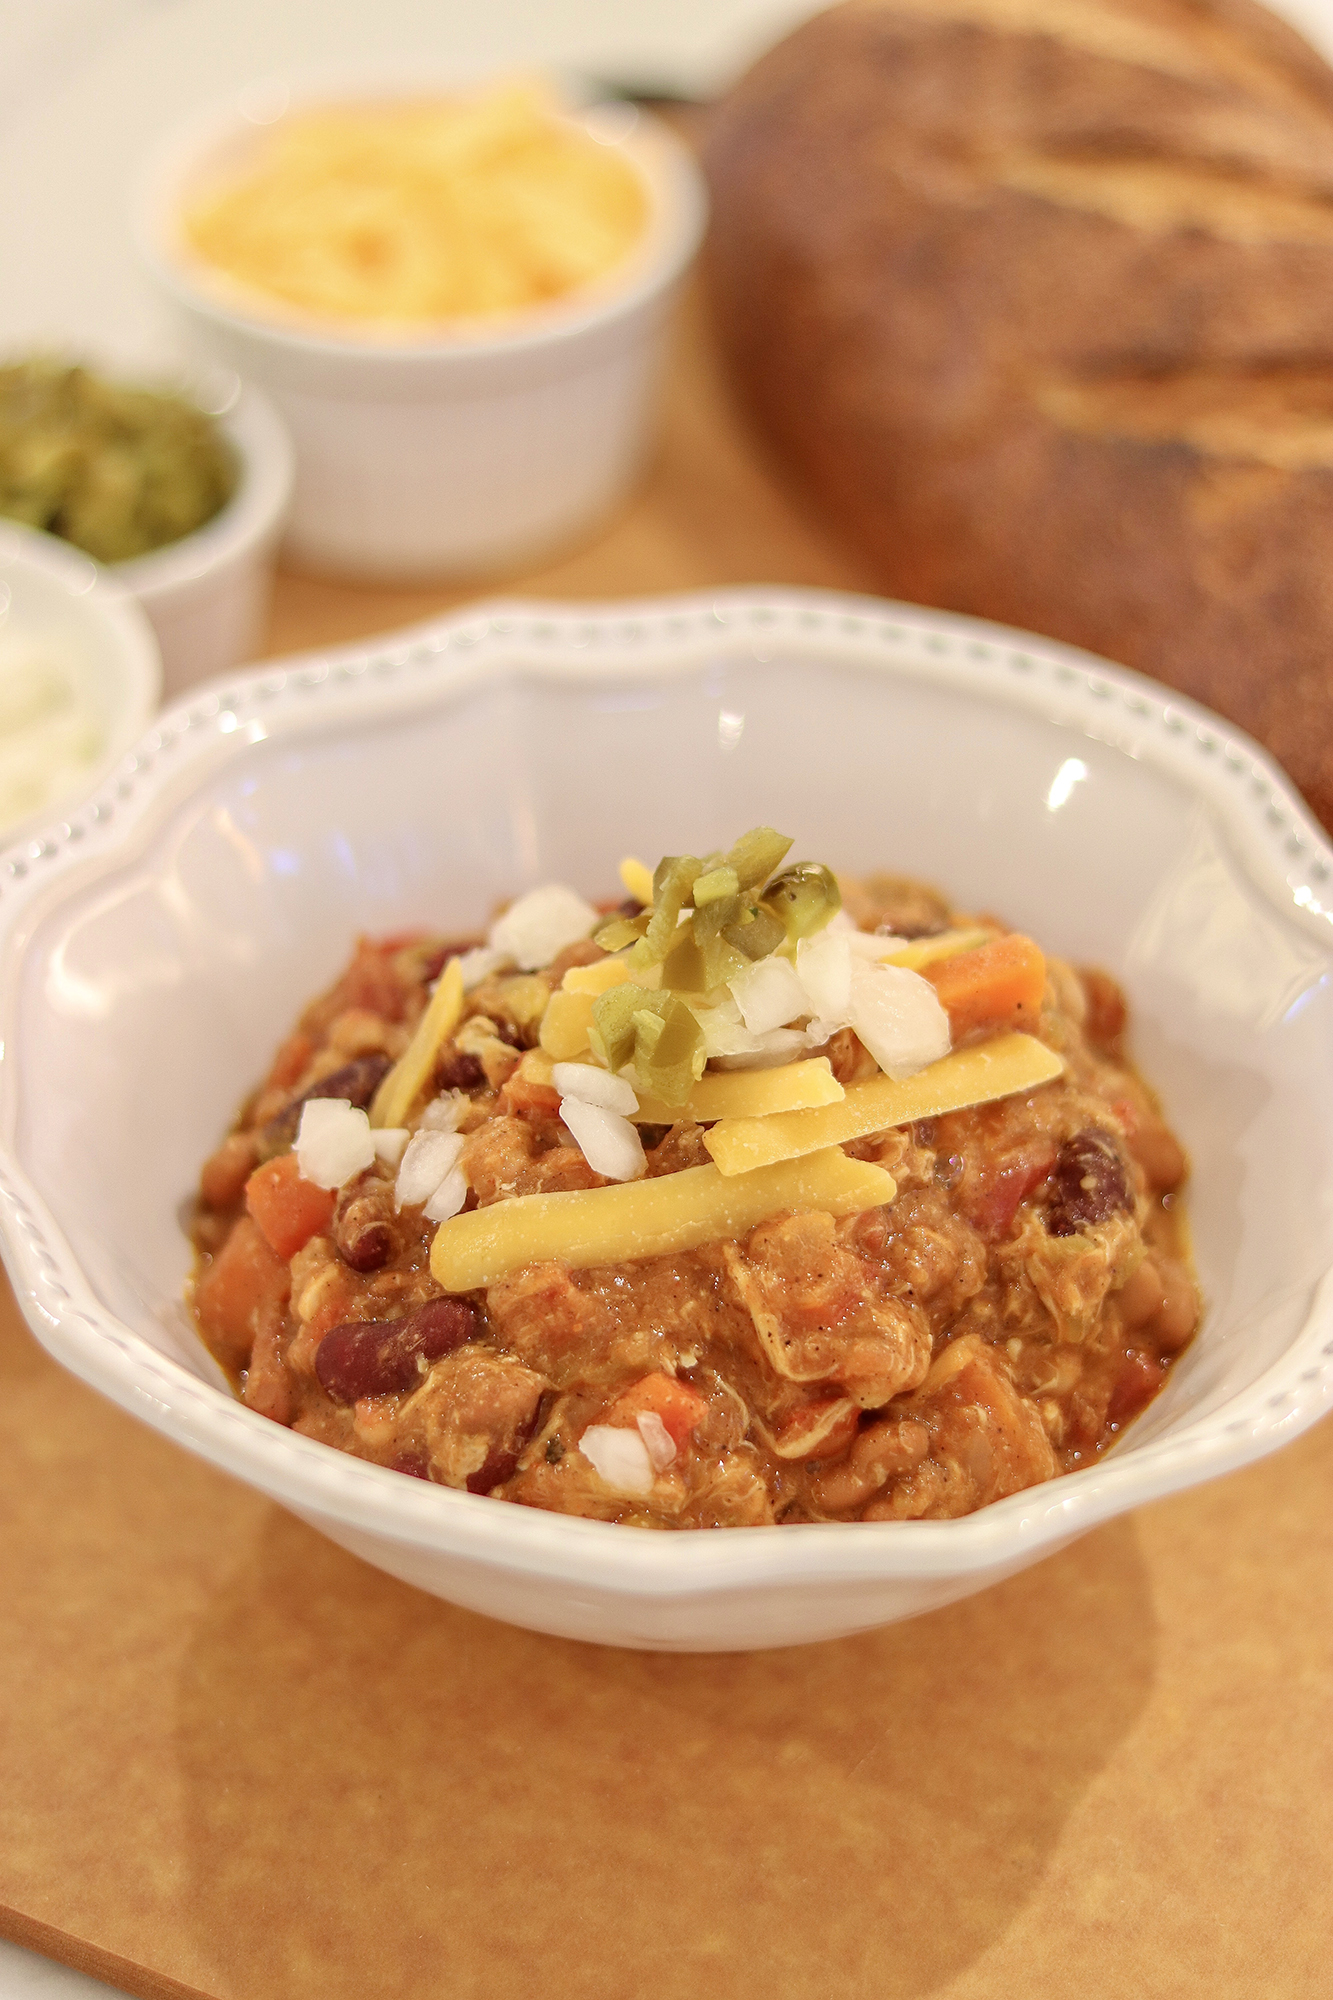 Delicious 3-Bean Chicken Chili Recipe for those cozy Fall/Winter nights in. The best weeknight dinner recipe for families! 